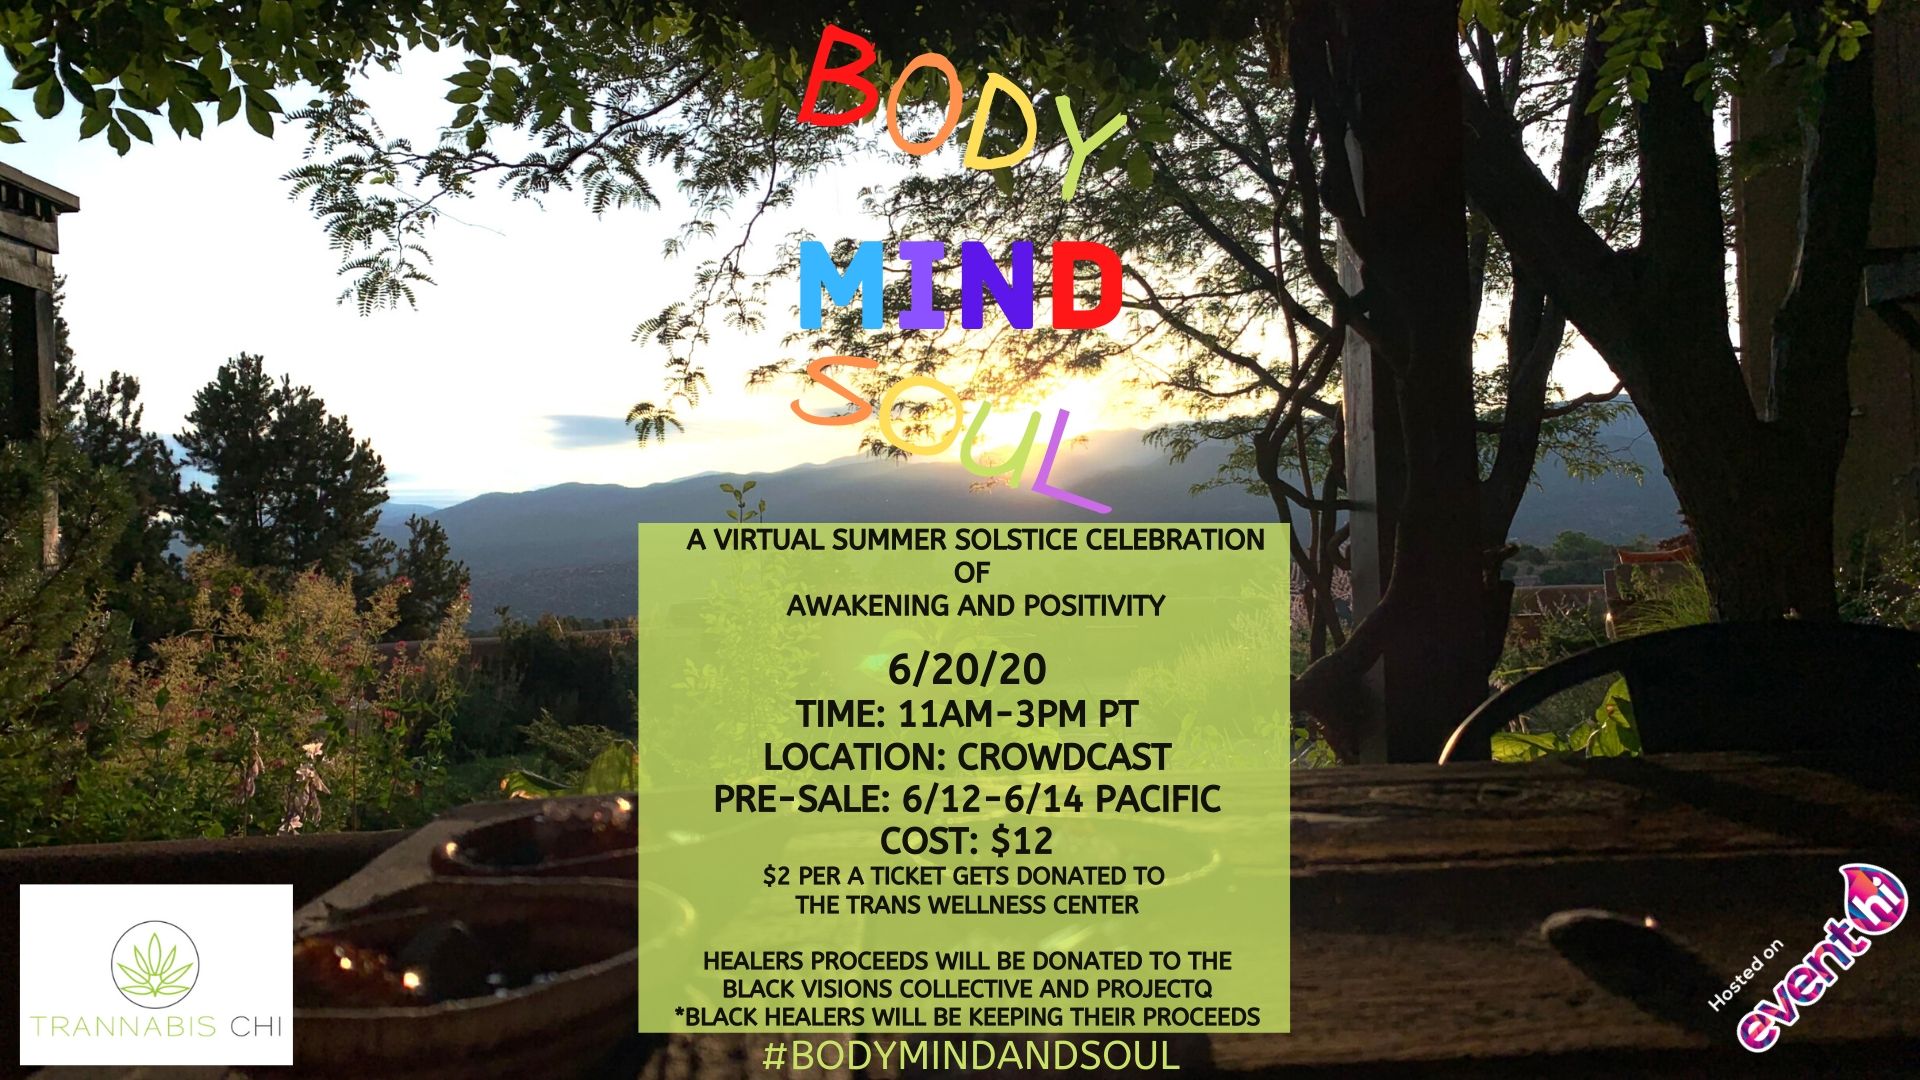 Body, Mind, and Soul: A Virtual Summer Solstice Celebration of Awakening and Positivity